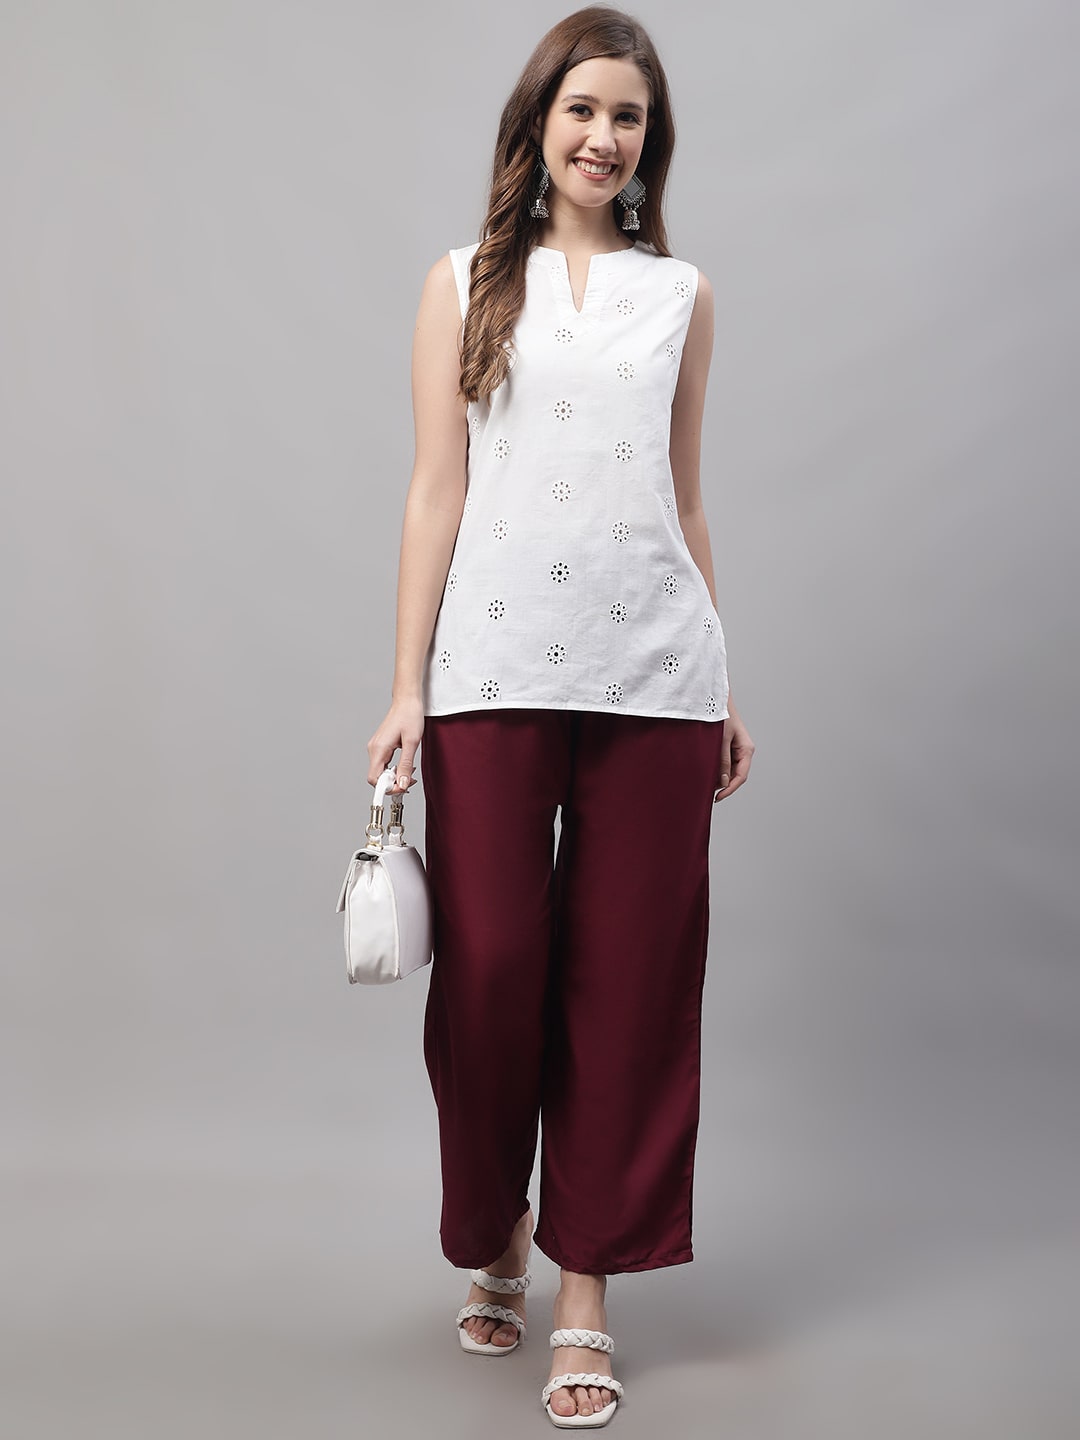 Wine Rayon Solid Palazzo With Side Pocket